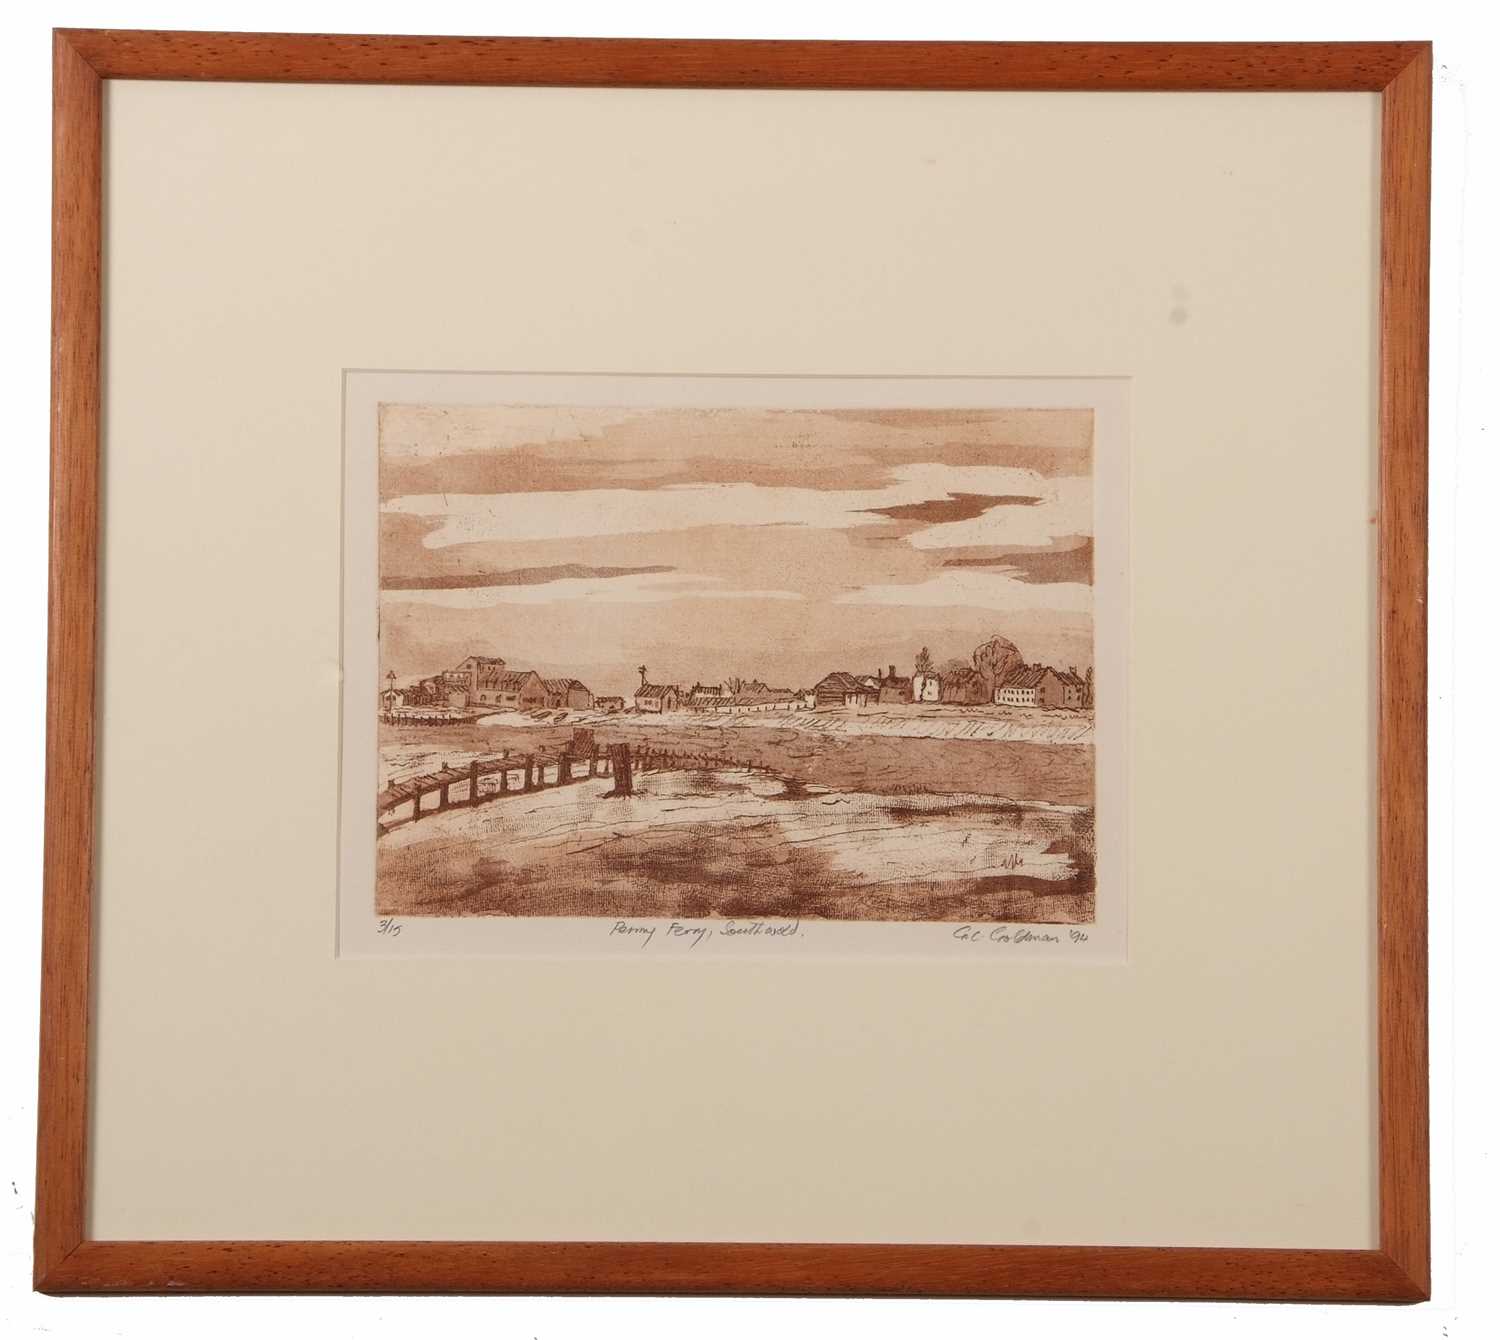 G.C.Goldman (British, 20th century), 'Permy Ferry, Southwold', limited edition sepia etching with - Image 2 of 2